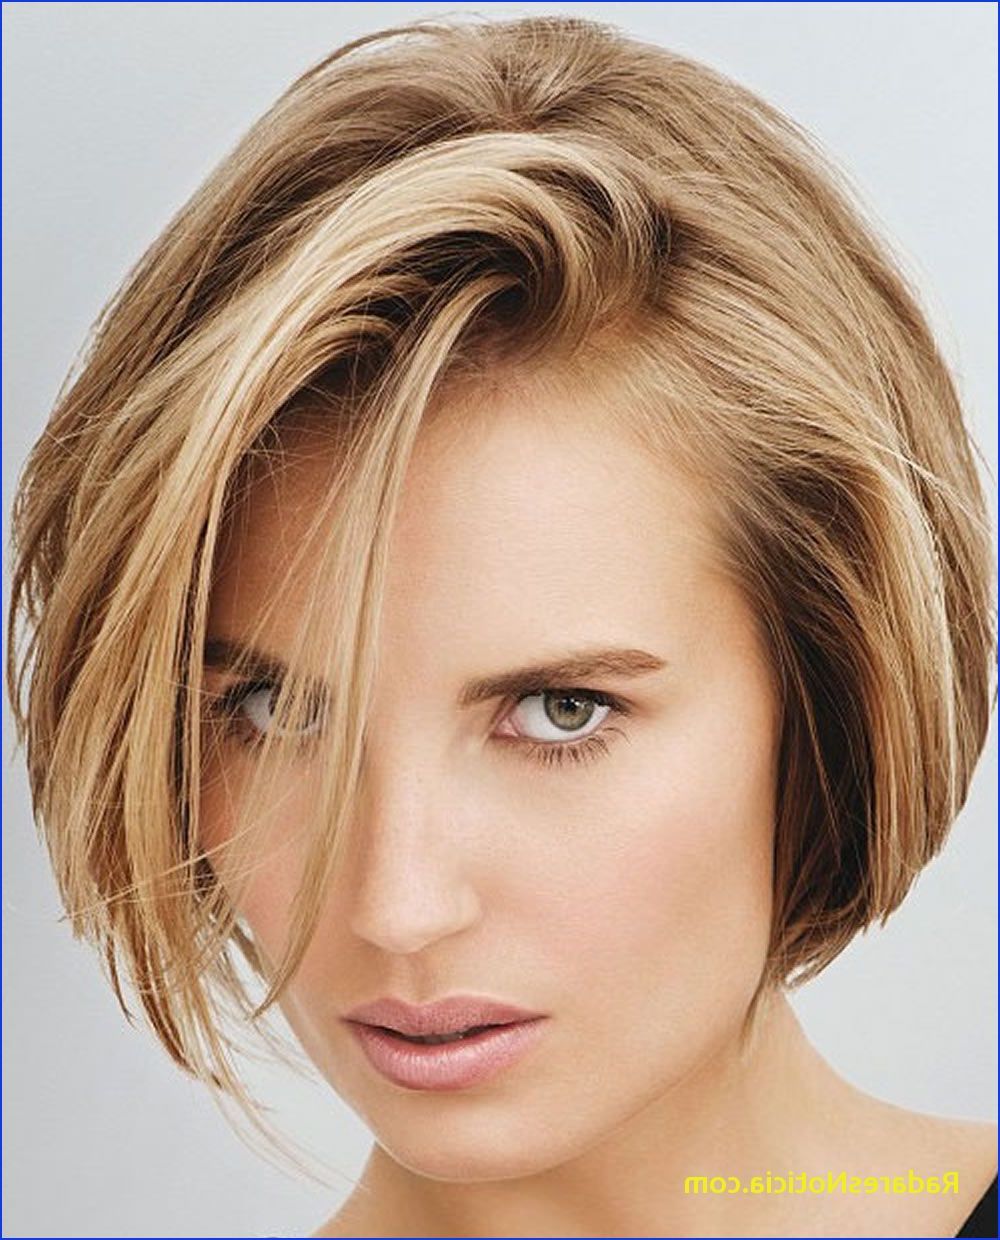 Long Bob With Bangs 2018 31 Chic Short Haircut Ideas 2018 & Pixie Intended For Chic Short Haircuts (Photo 8 of 25)